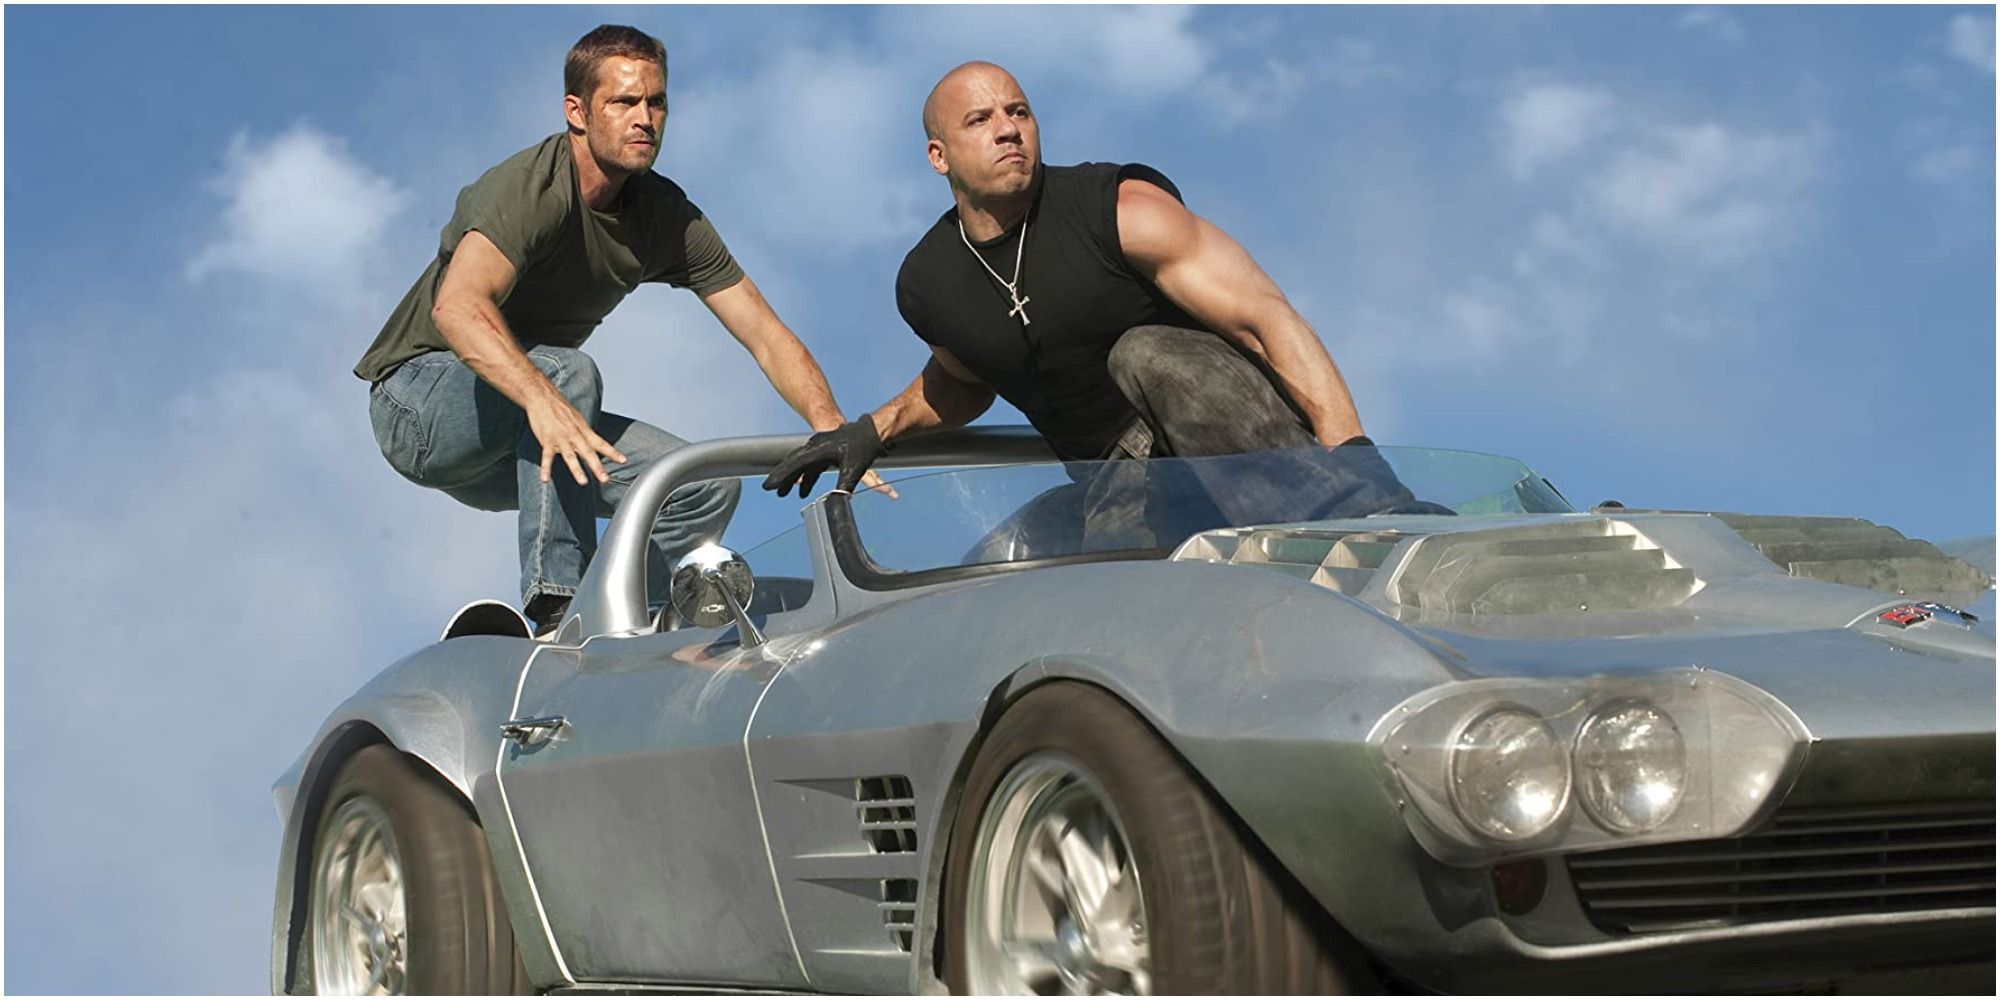 F9 Tyrese Gibsons 5 Best (& 5 Worst) Movies According To Rotten Tomatoes RELATED 5 Actors Who Nailed Their Roles In Fast & Furious (& 5 Who Didnt Resonate With Fans)